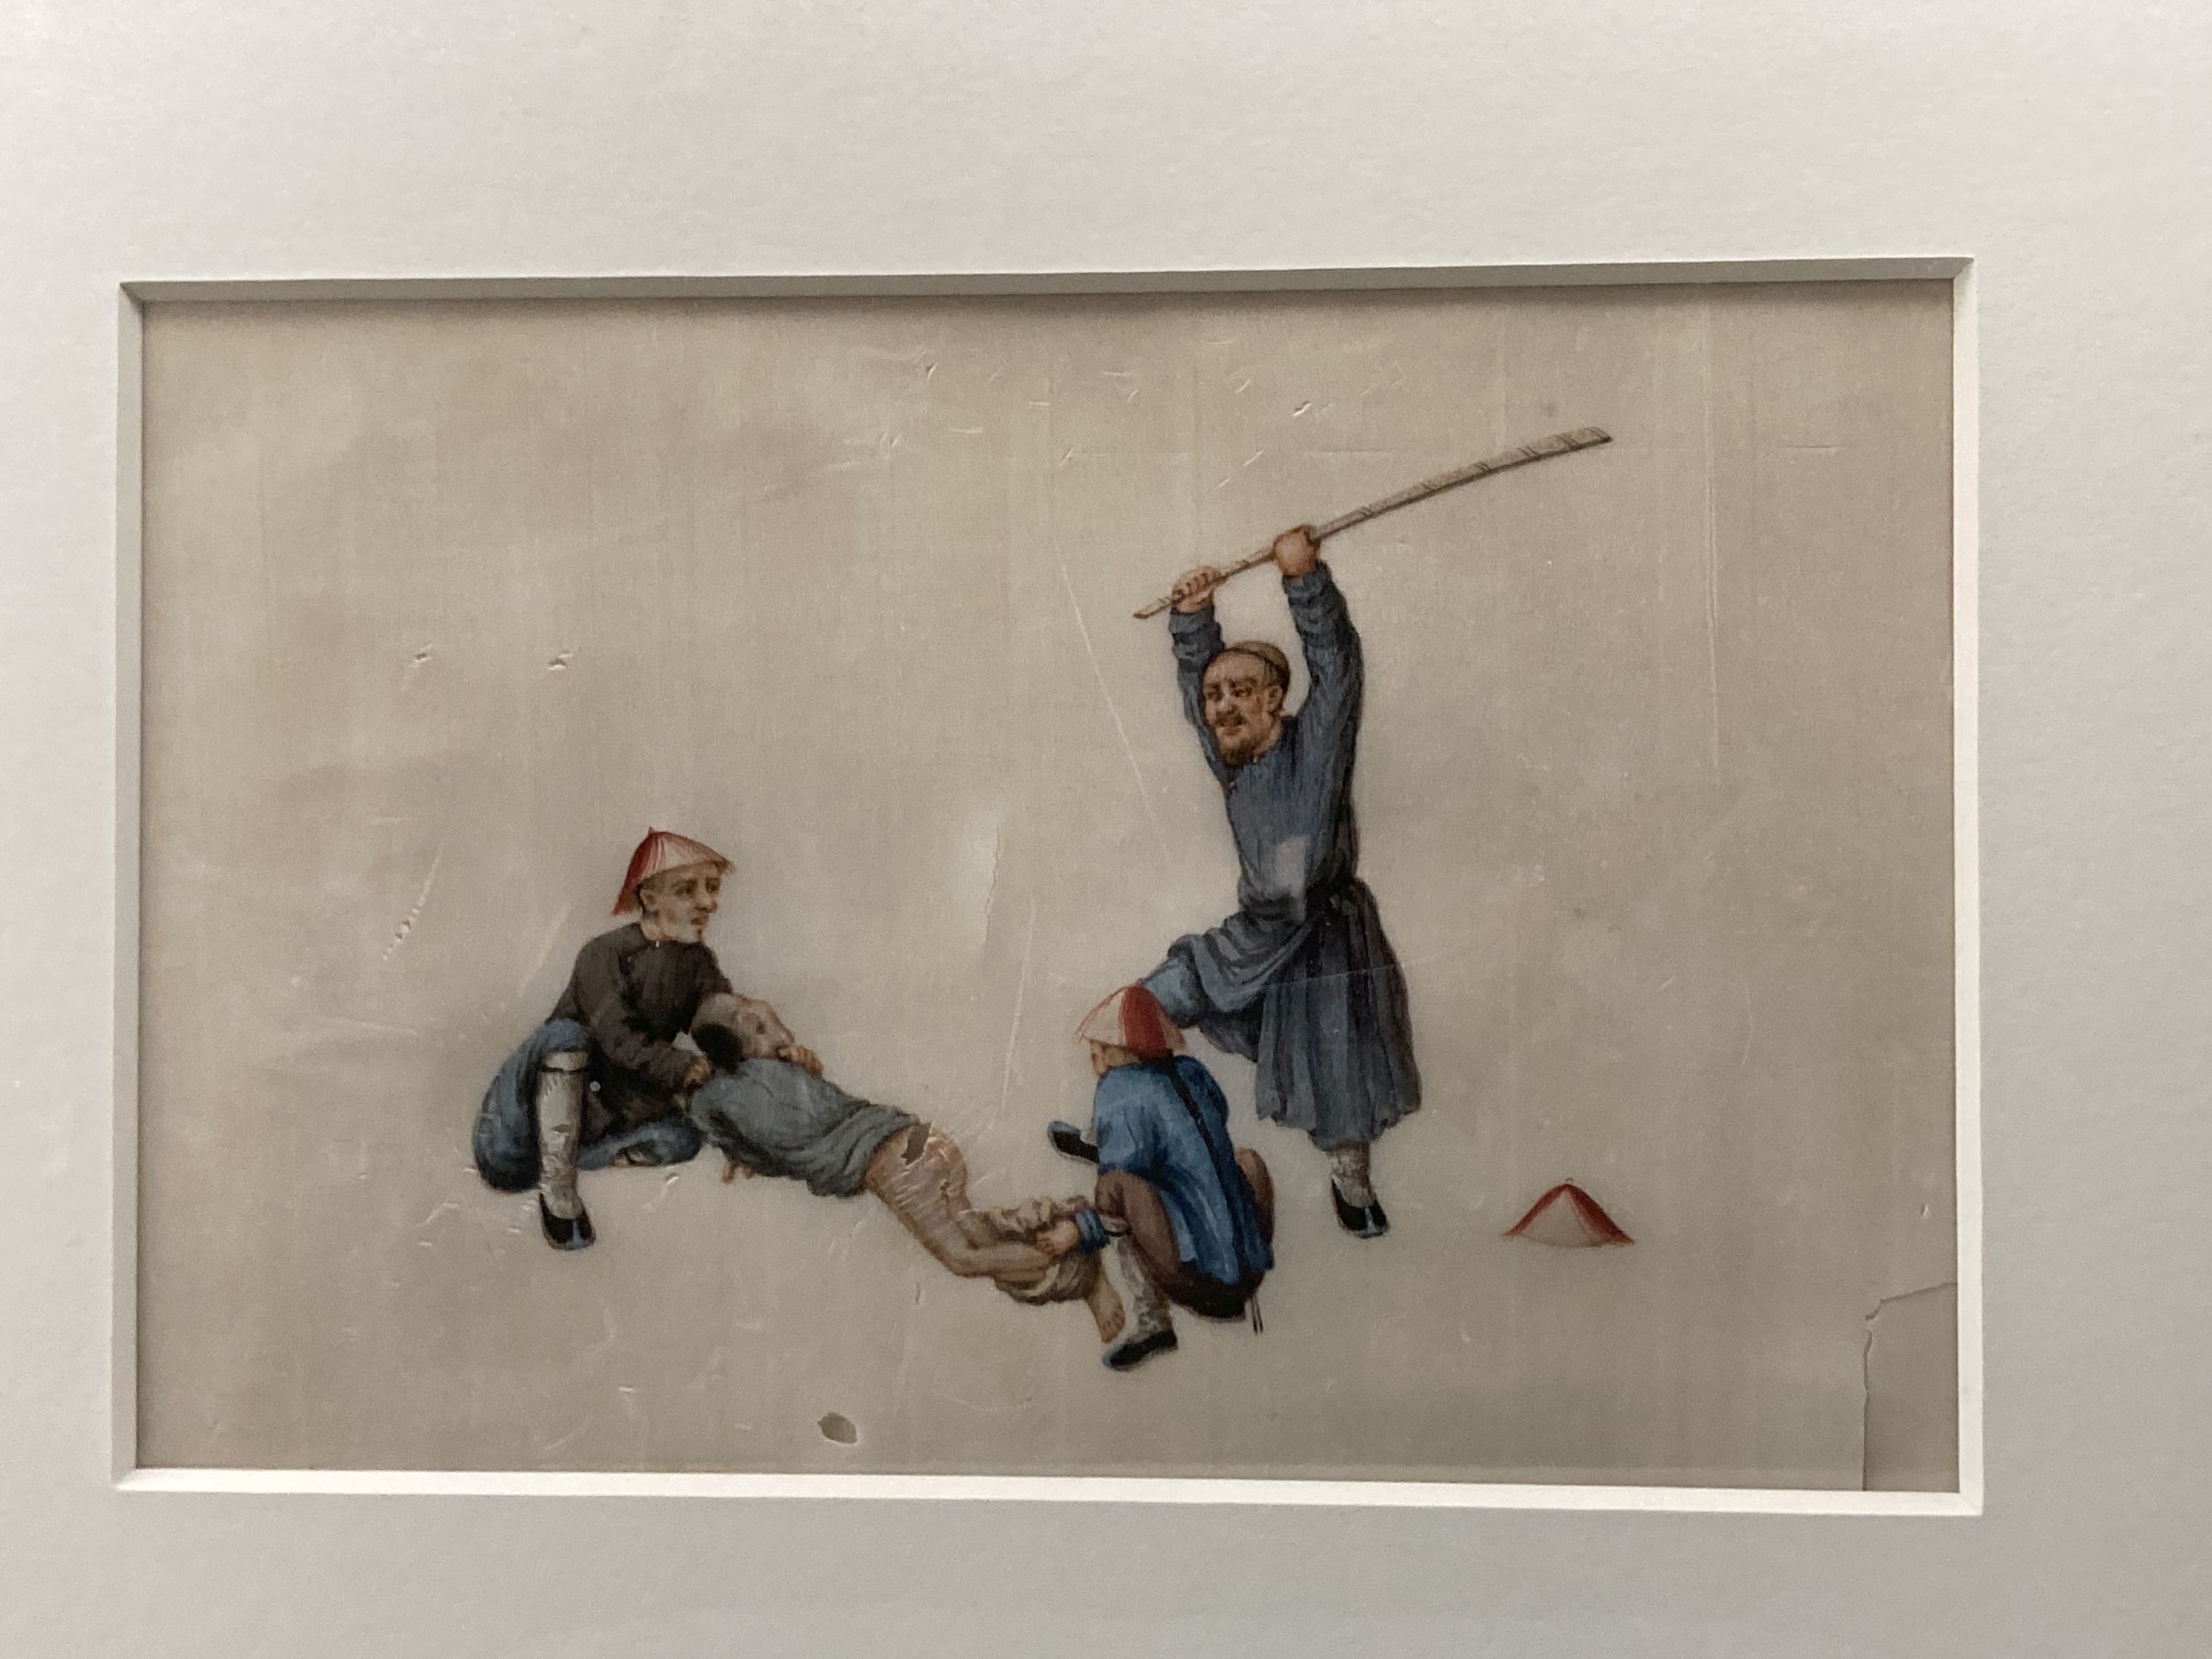 Chinese School c.1900, 4 gouache on pith paper, Execution and torture scenes, 15 x 22cm